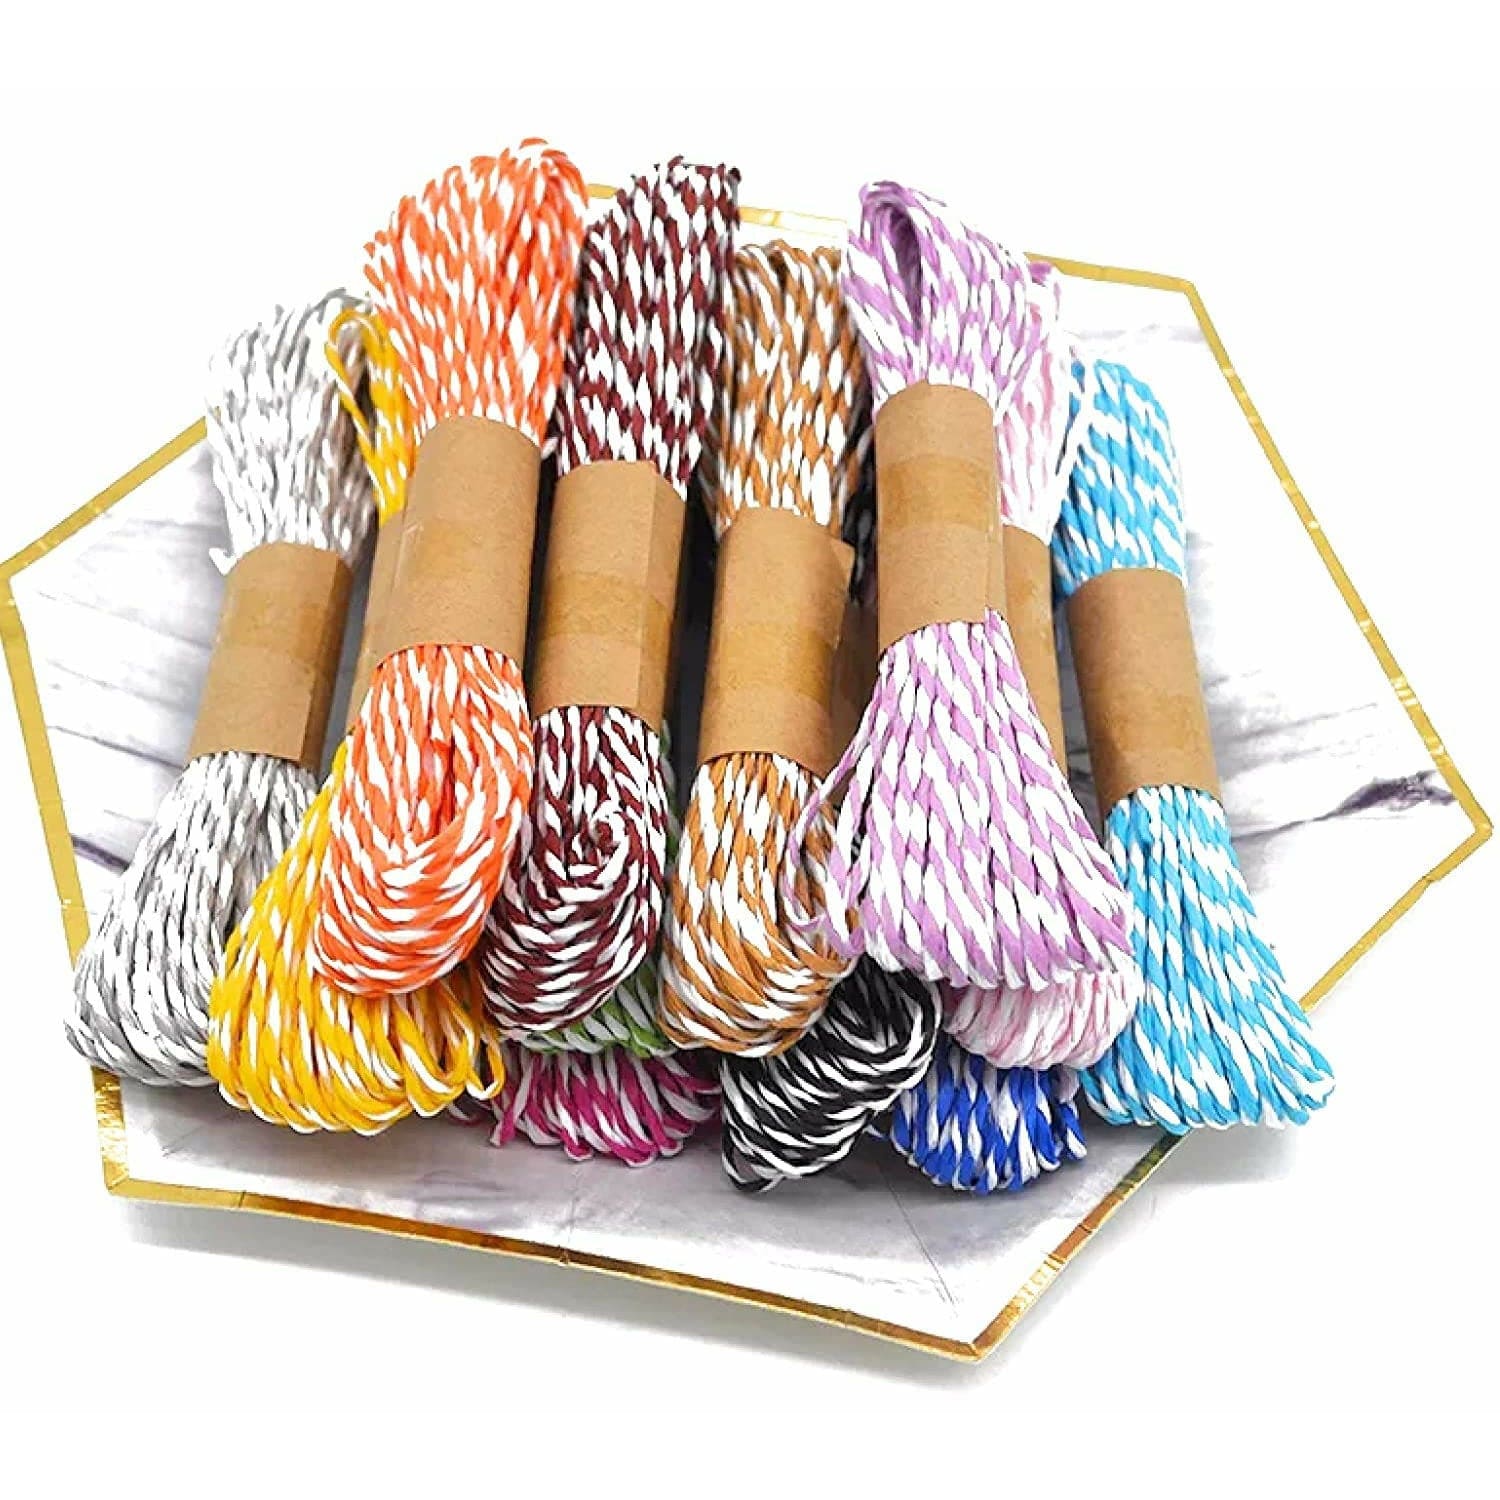 Ravrai Craft Twisted Paper Raffia Craft Favor Gift Wrapping Twine Rope Thread Scrapbooks Invitation Flower Decoration - Pack of 12.